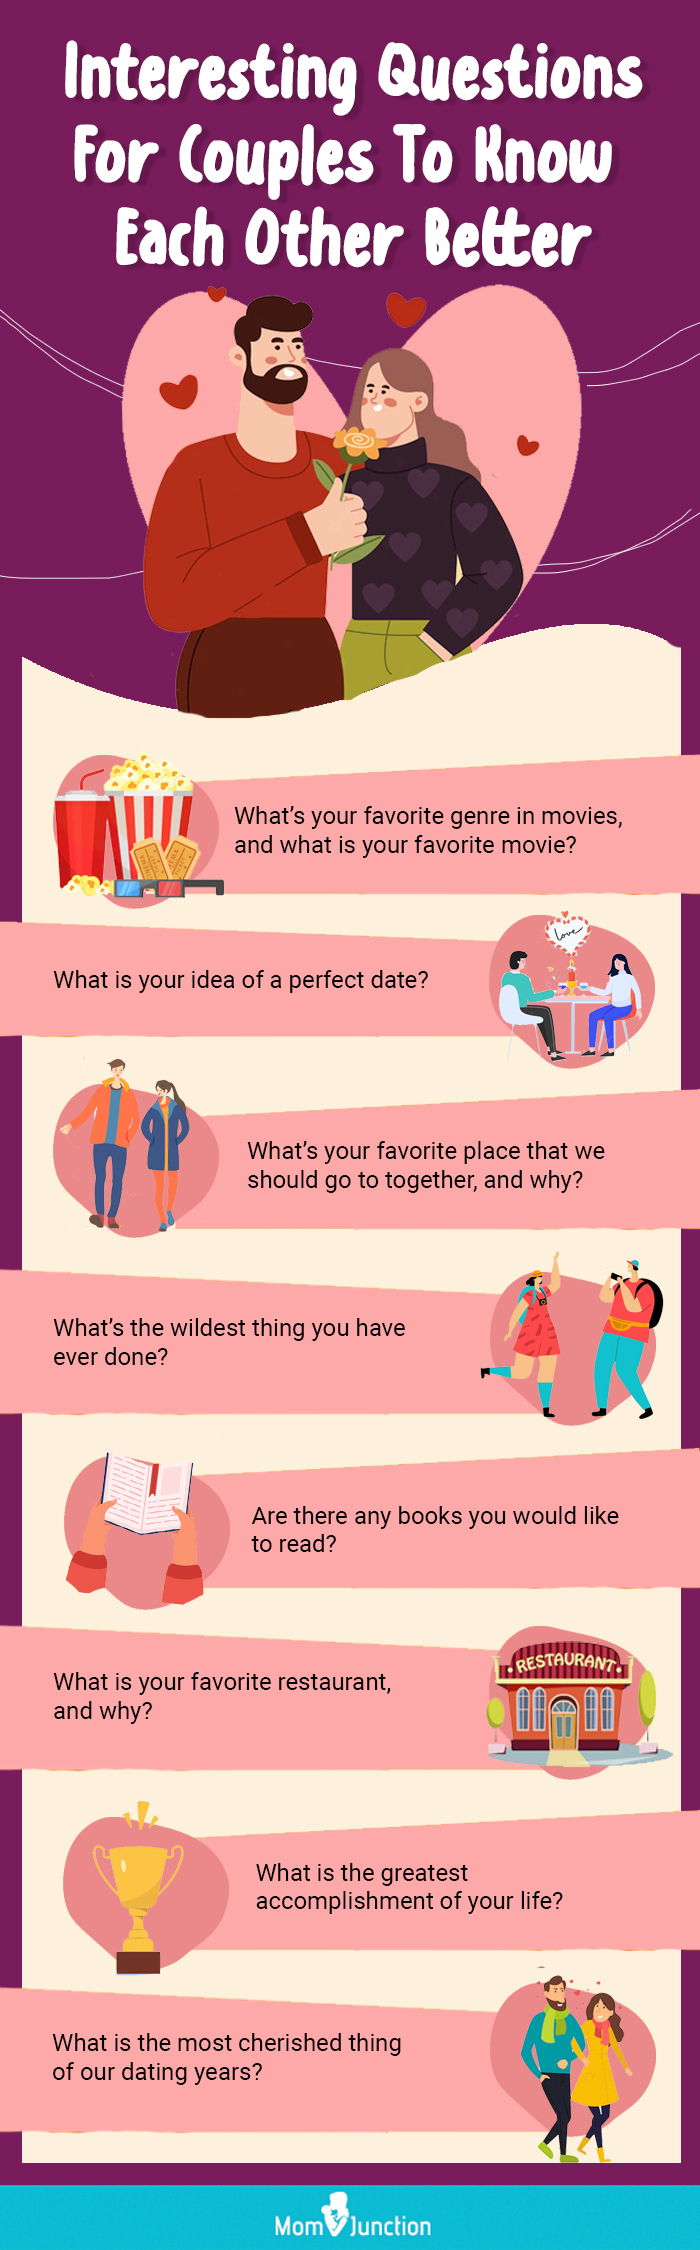 questions to ask your partner [infographic]